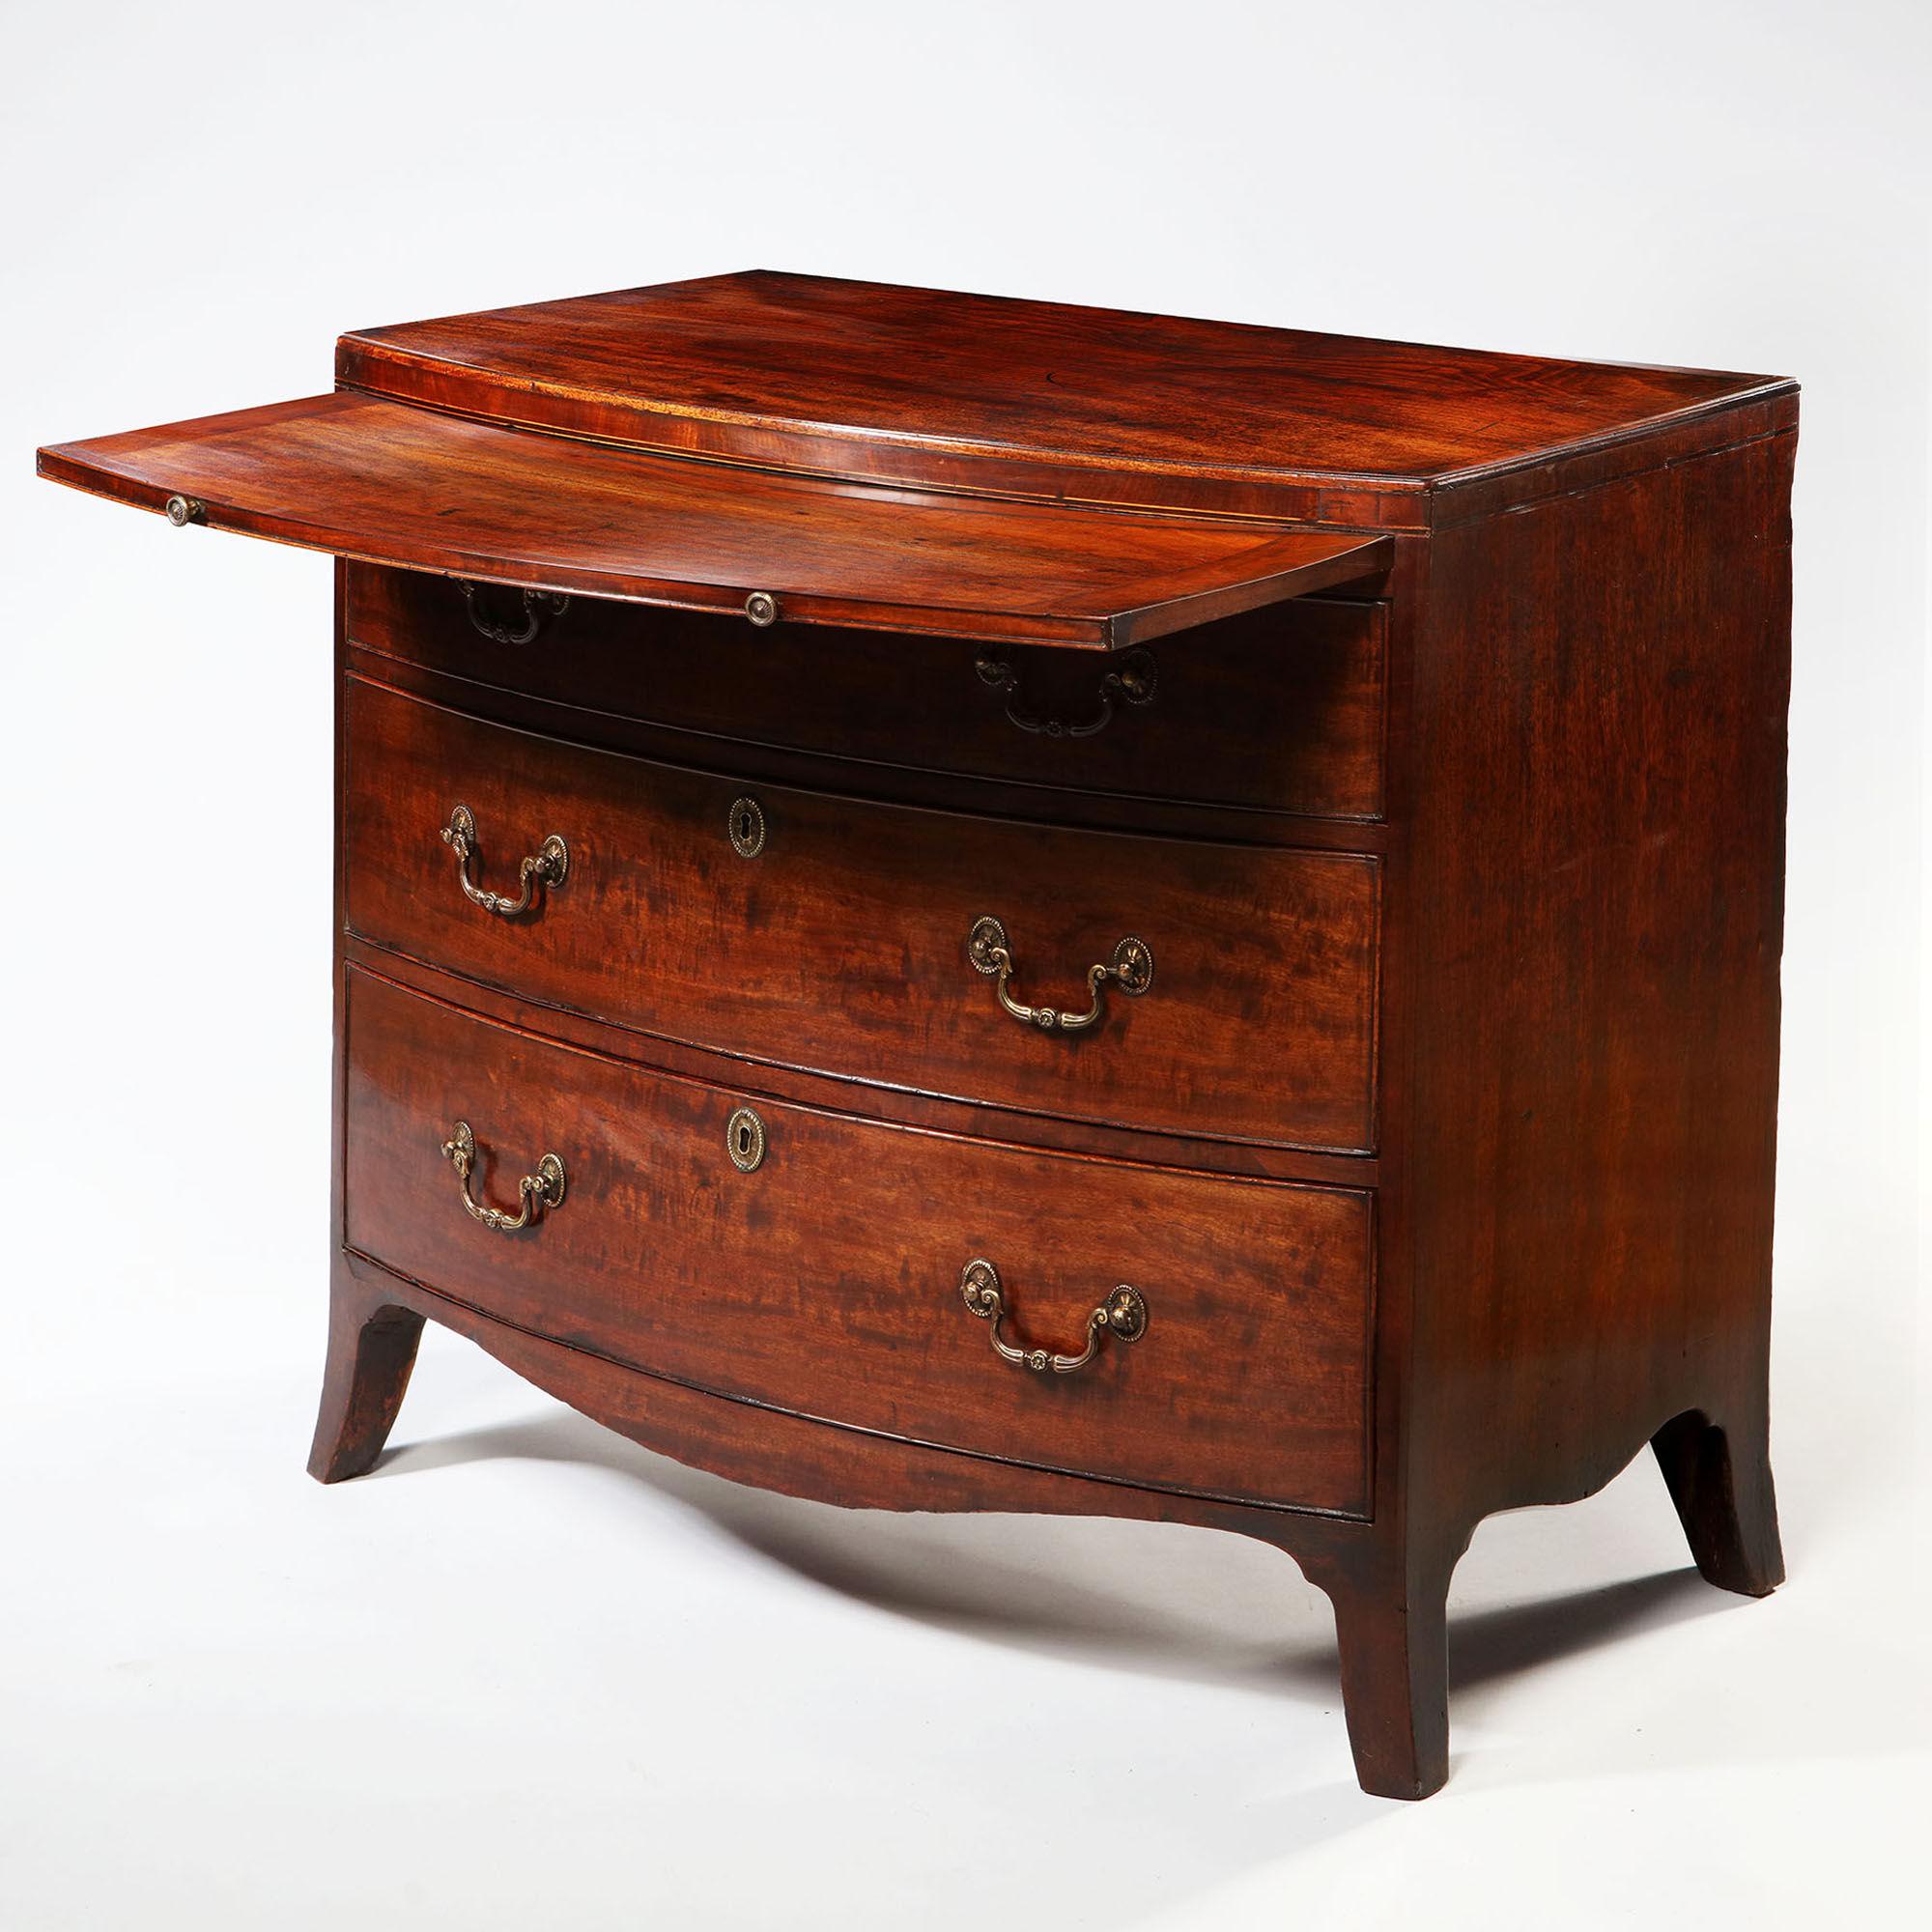 A fine George III Sheraton period bow-fronted mahogany chest of drawers with brushing slide. The chest has the perfect time aged color to its original wax finished surface and has truly commendable proportions. I love everything about this